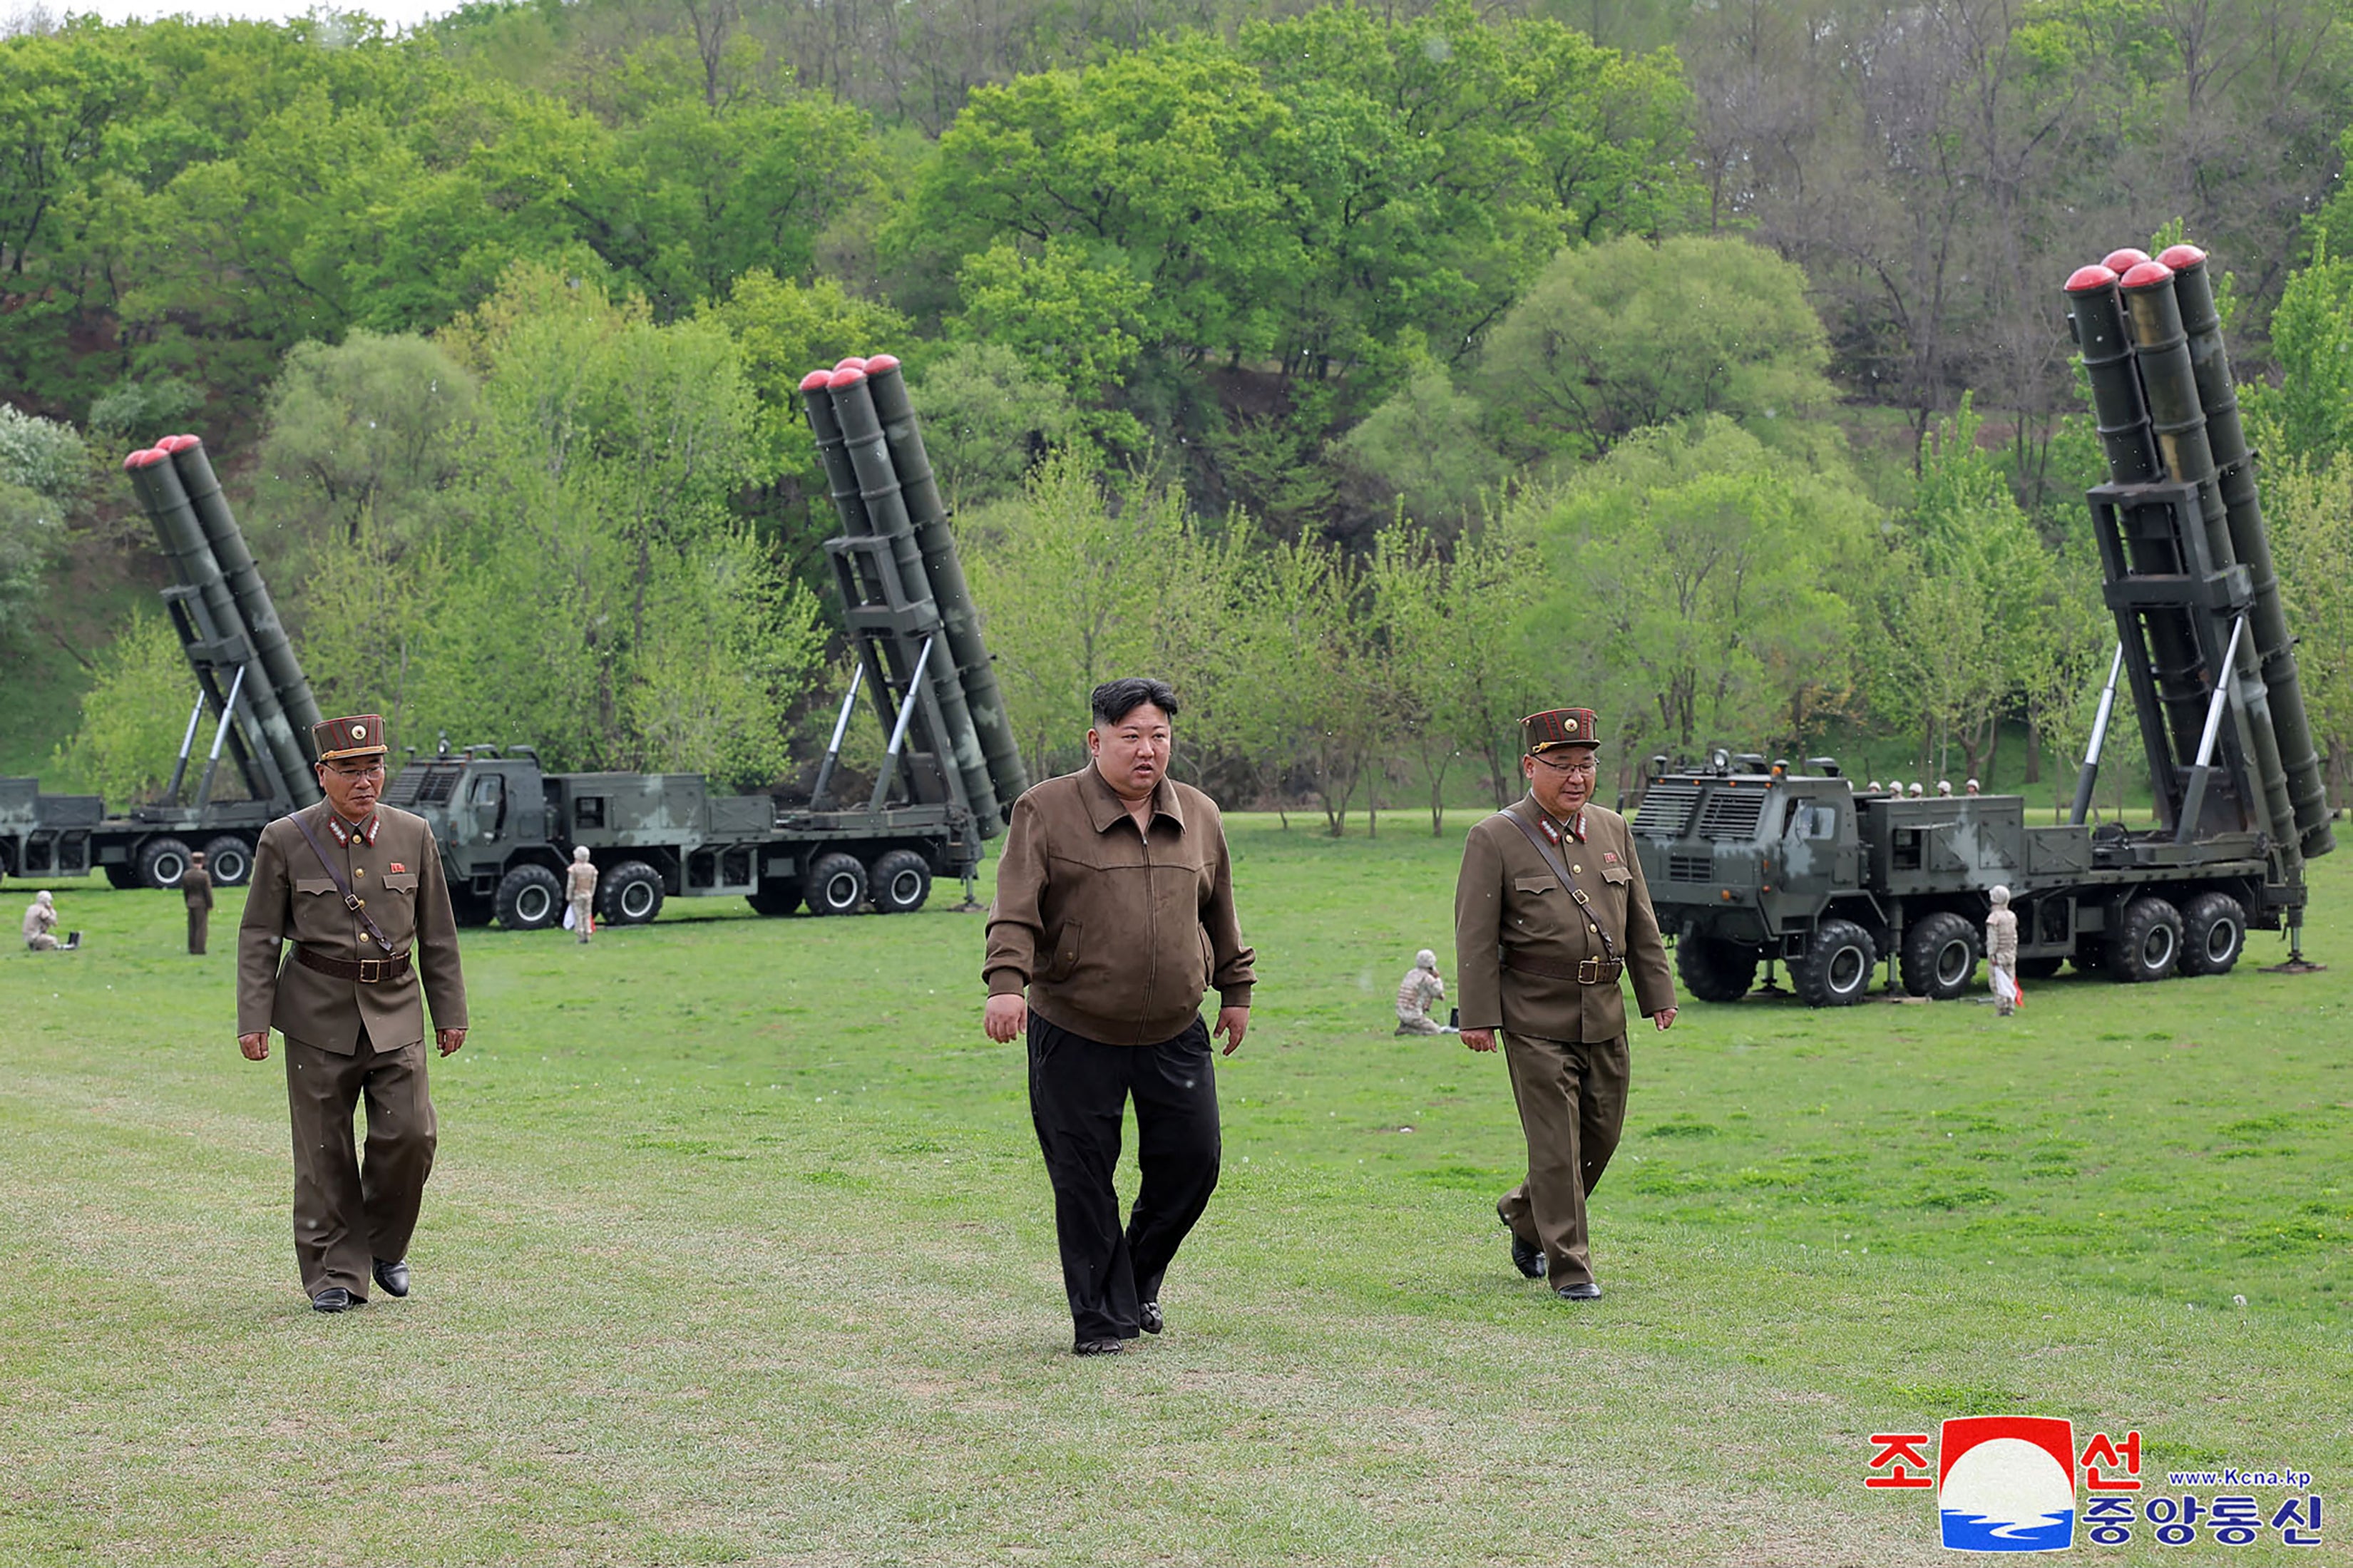 Kim Jong-un oversees a virtual nuclear counterattack training exercise with a large rocket artillery unit